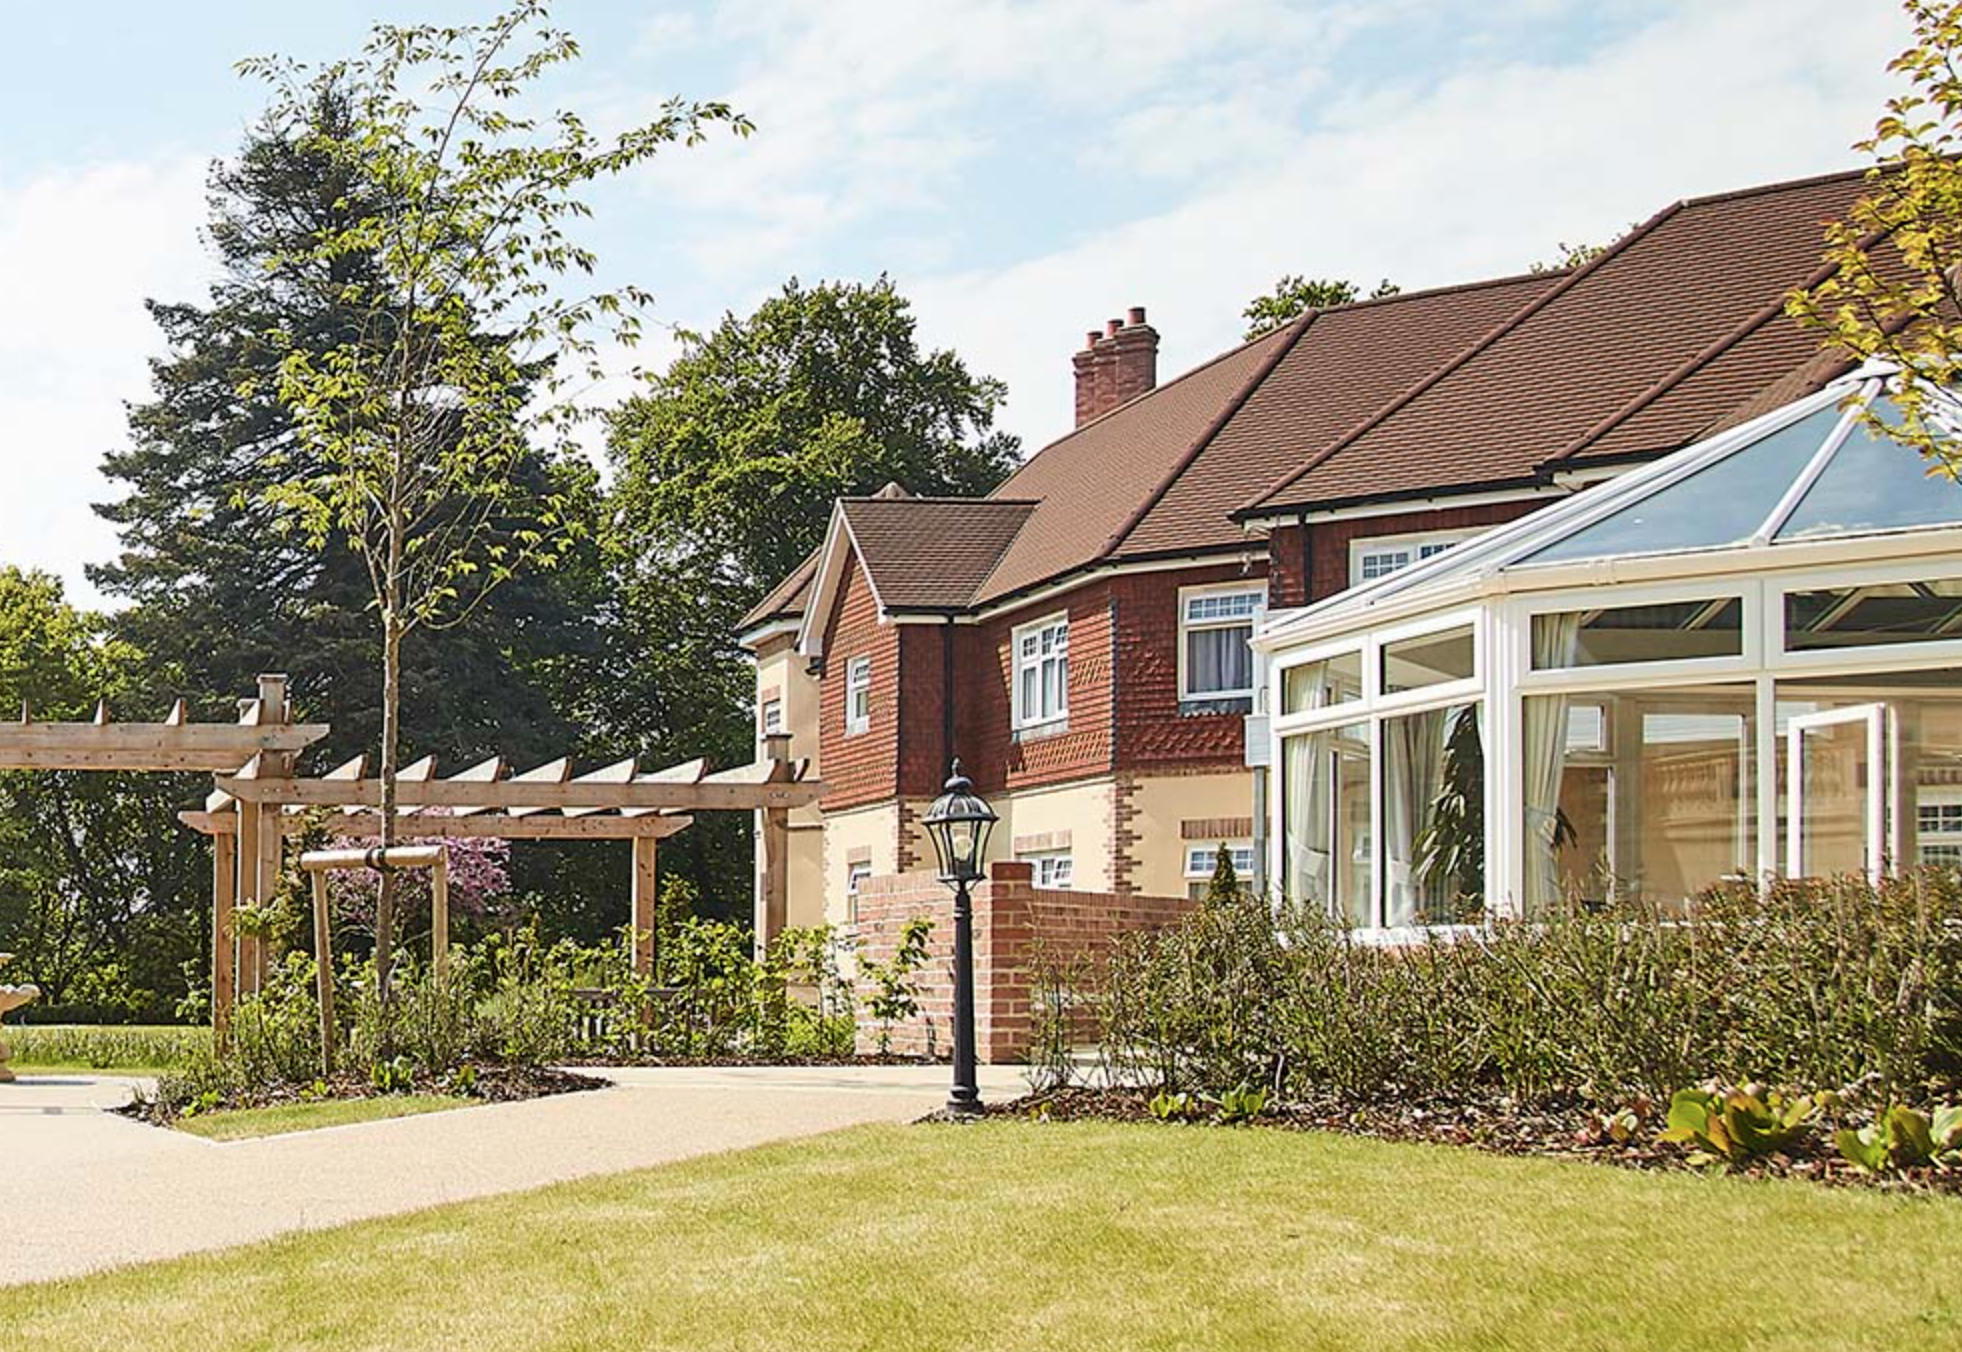 Exterior of St. Ives Country House care home in St Ives, Ringwood